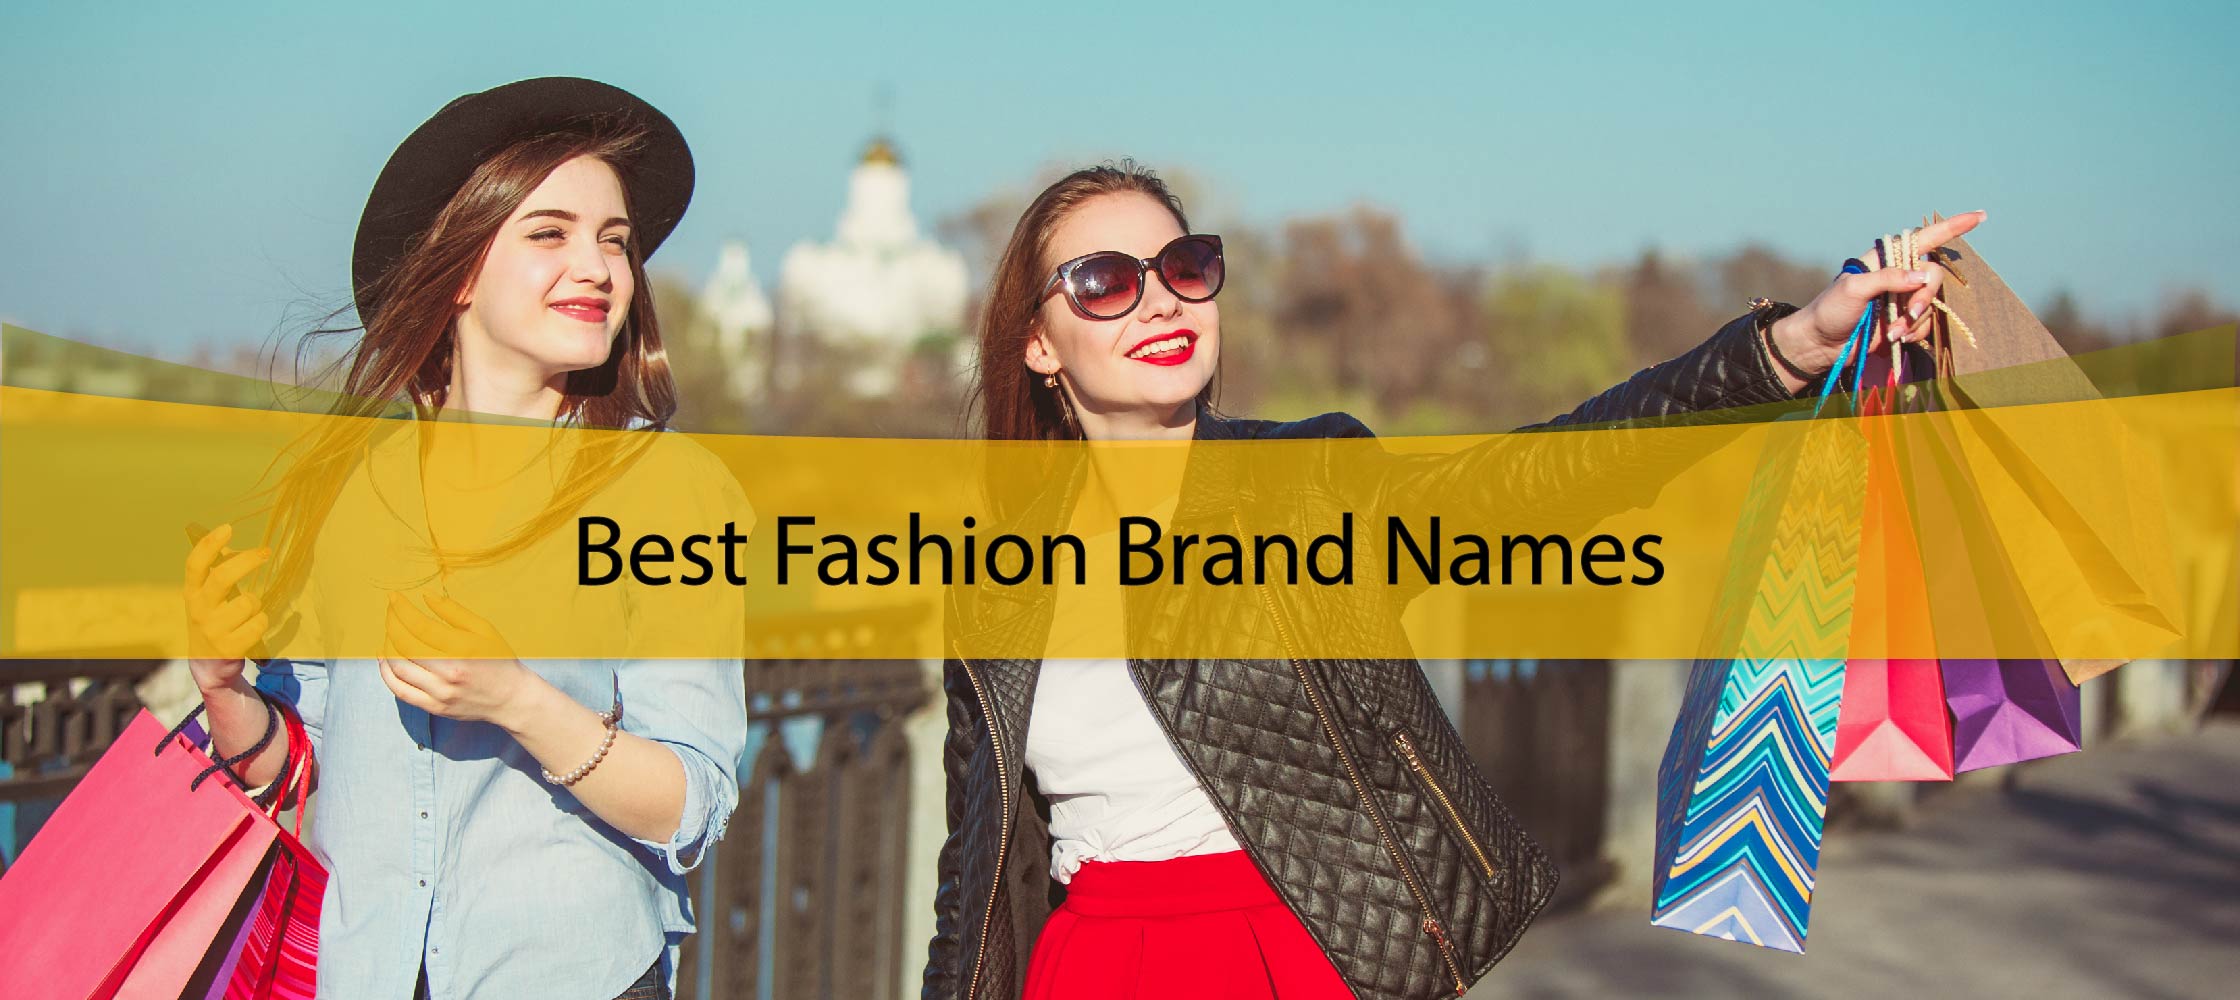 350+ Clothing Brand Name Ideas for Your New Business - UNI